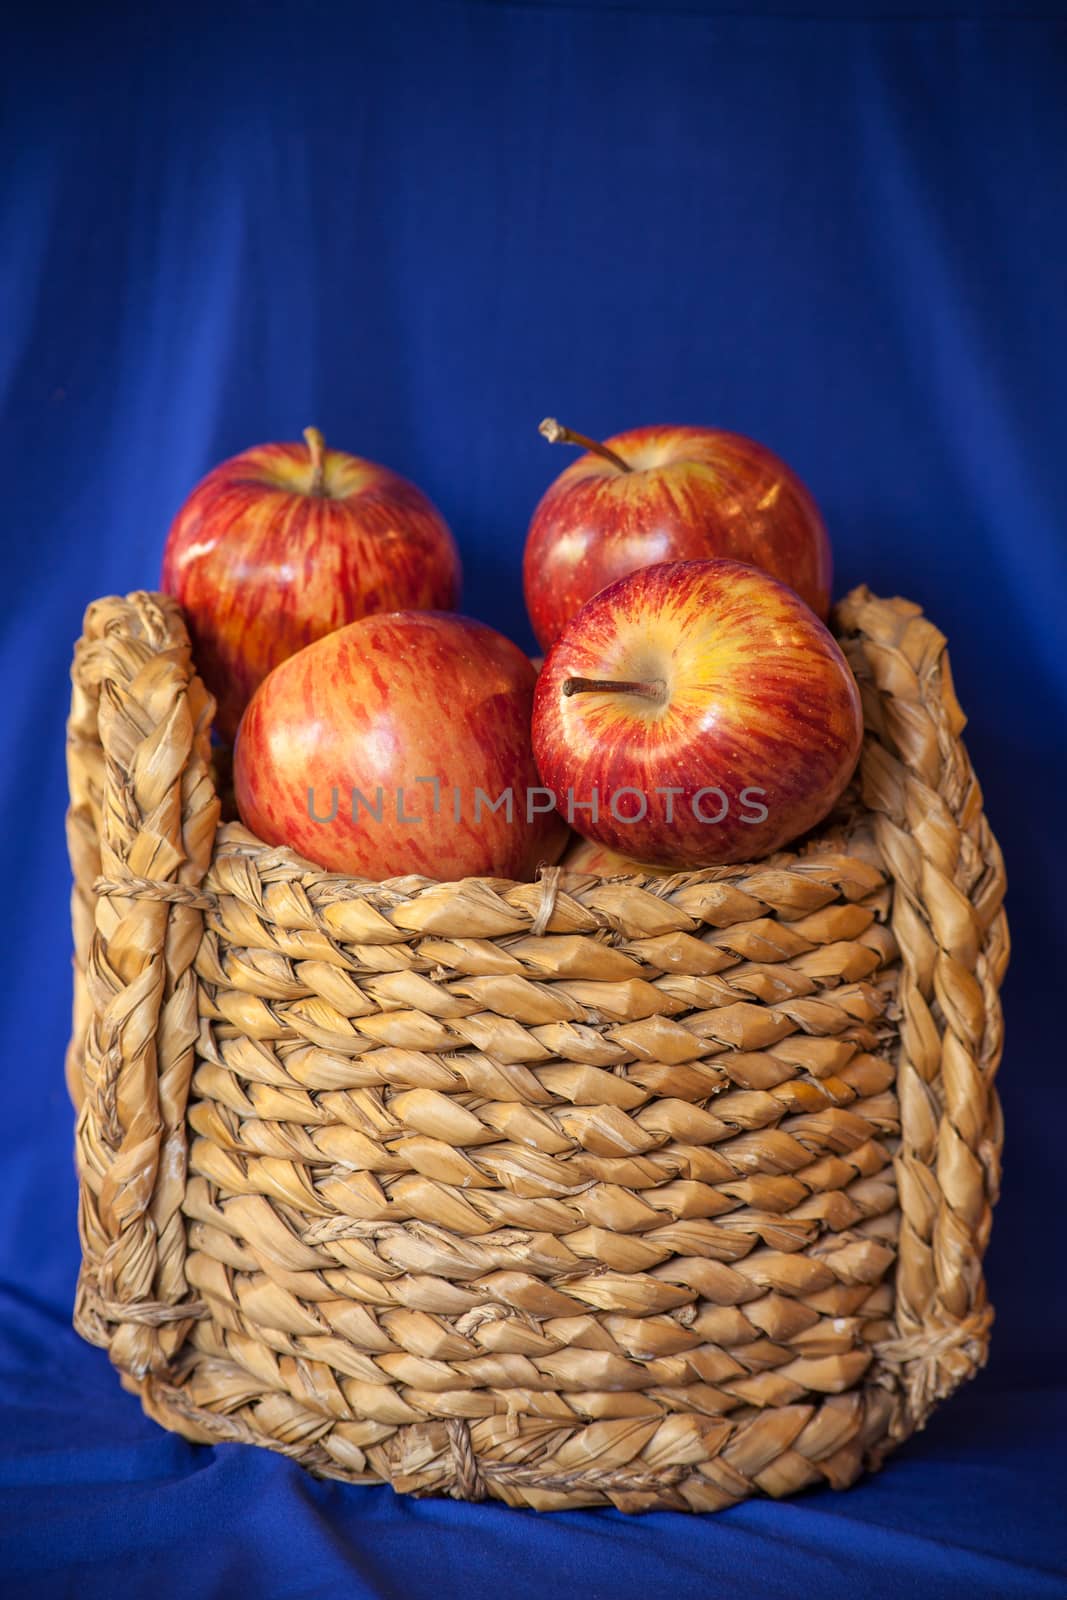 Still life image of a small grass basket filled with large red Starking apples on a blue background.